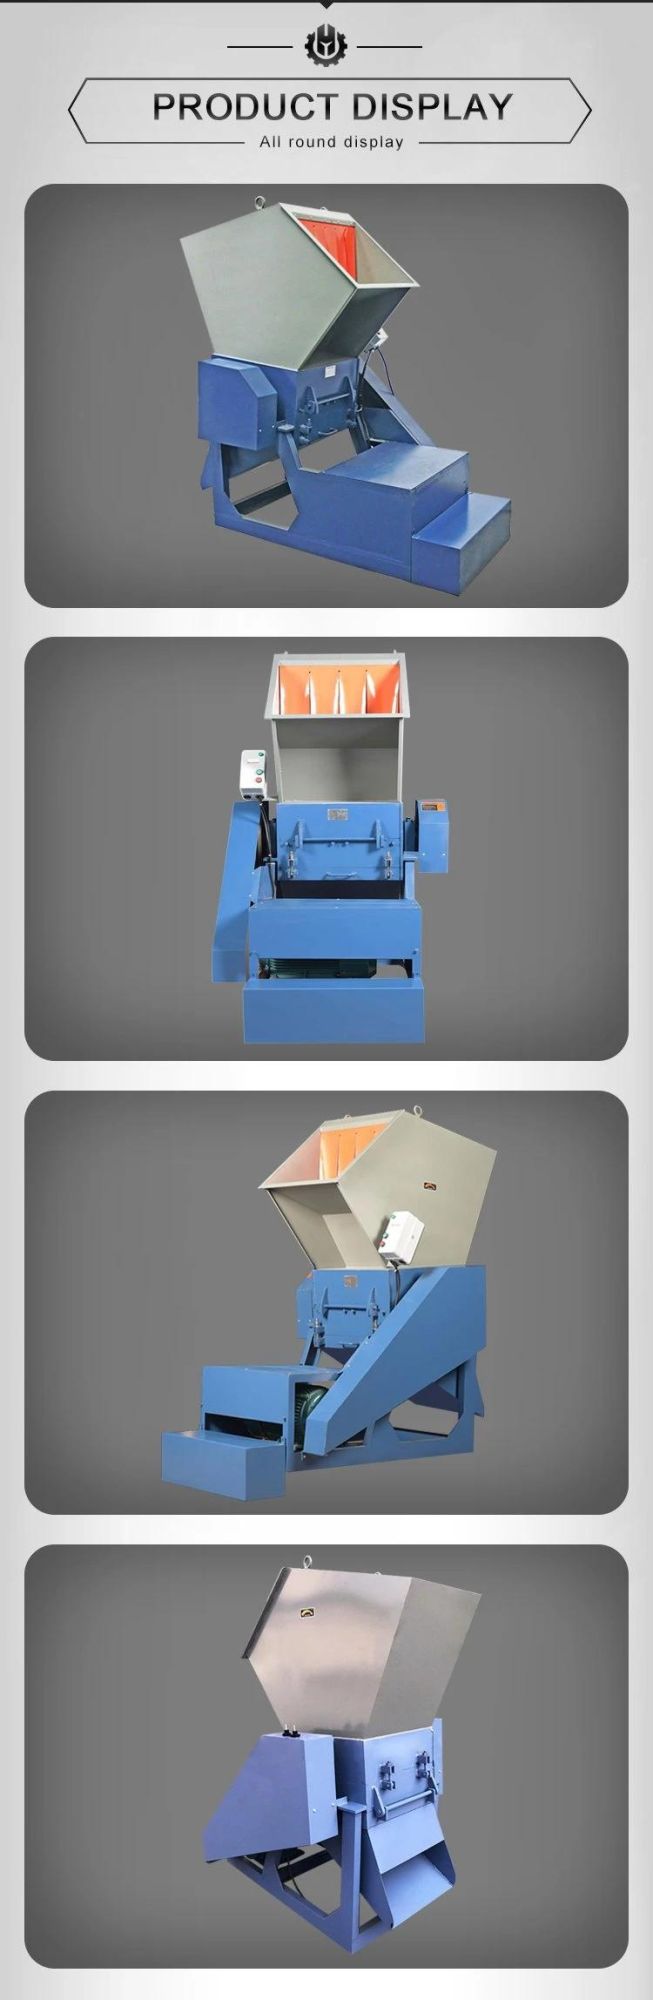 China Manufacture Plastic Bottle Crusher Machine Good Performance Bottle Plastic Recycling Pulverizer Machinery